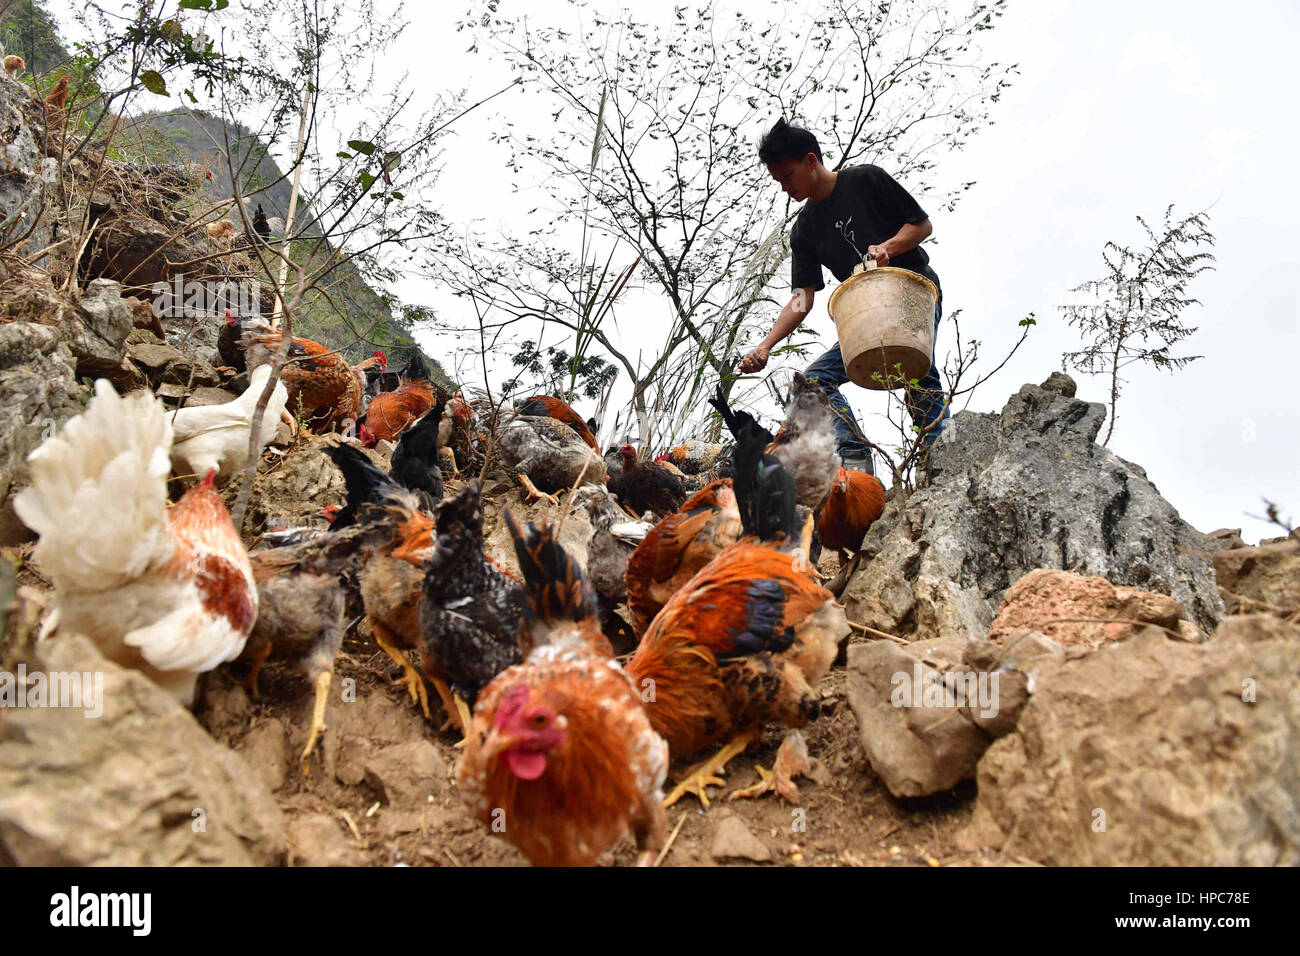 (170221) -- DAHUA, Feb. 21, 2017 (Xinhua) -- A villager feeds chickens in Nongxiong Village of Qibainong Township in Dahua Yao Autonomous County, south China's Guangxi Zhuang Autonomous Region, Jan. 5, 2017. 'Cursed by devils' -- that is what the locals say about Qibainong. Named after the rugged karst landforms that surround it, the township has been identified as one of the most inhospitable places on earth by UN officials. However, change is expected soon. Local governments are building roads for every village with more than 20 households. Relocation has been proposed for those who live in Stock Photo